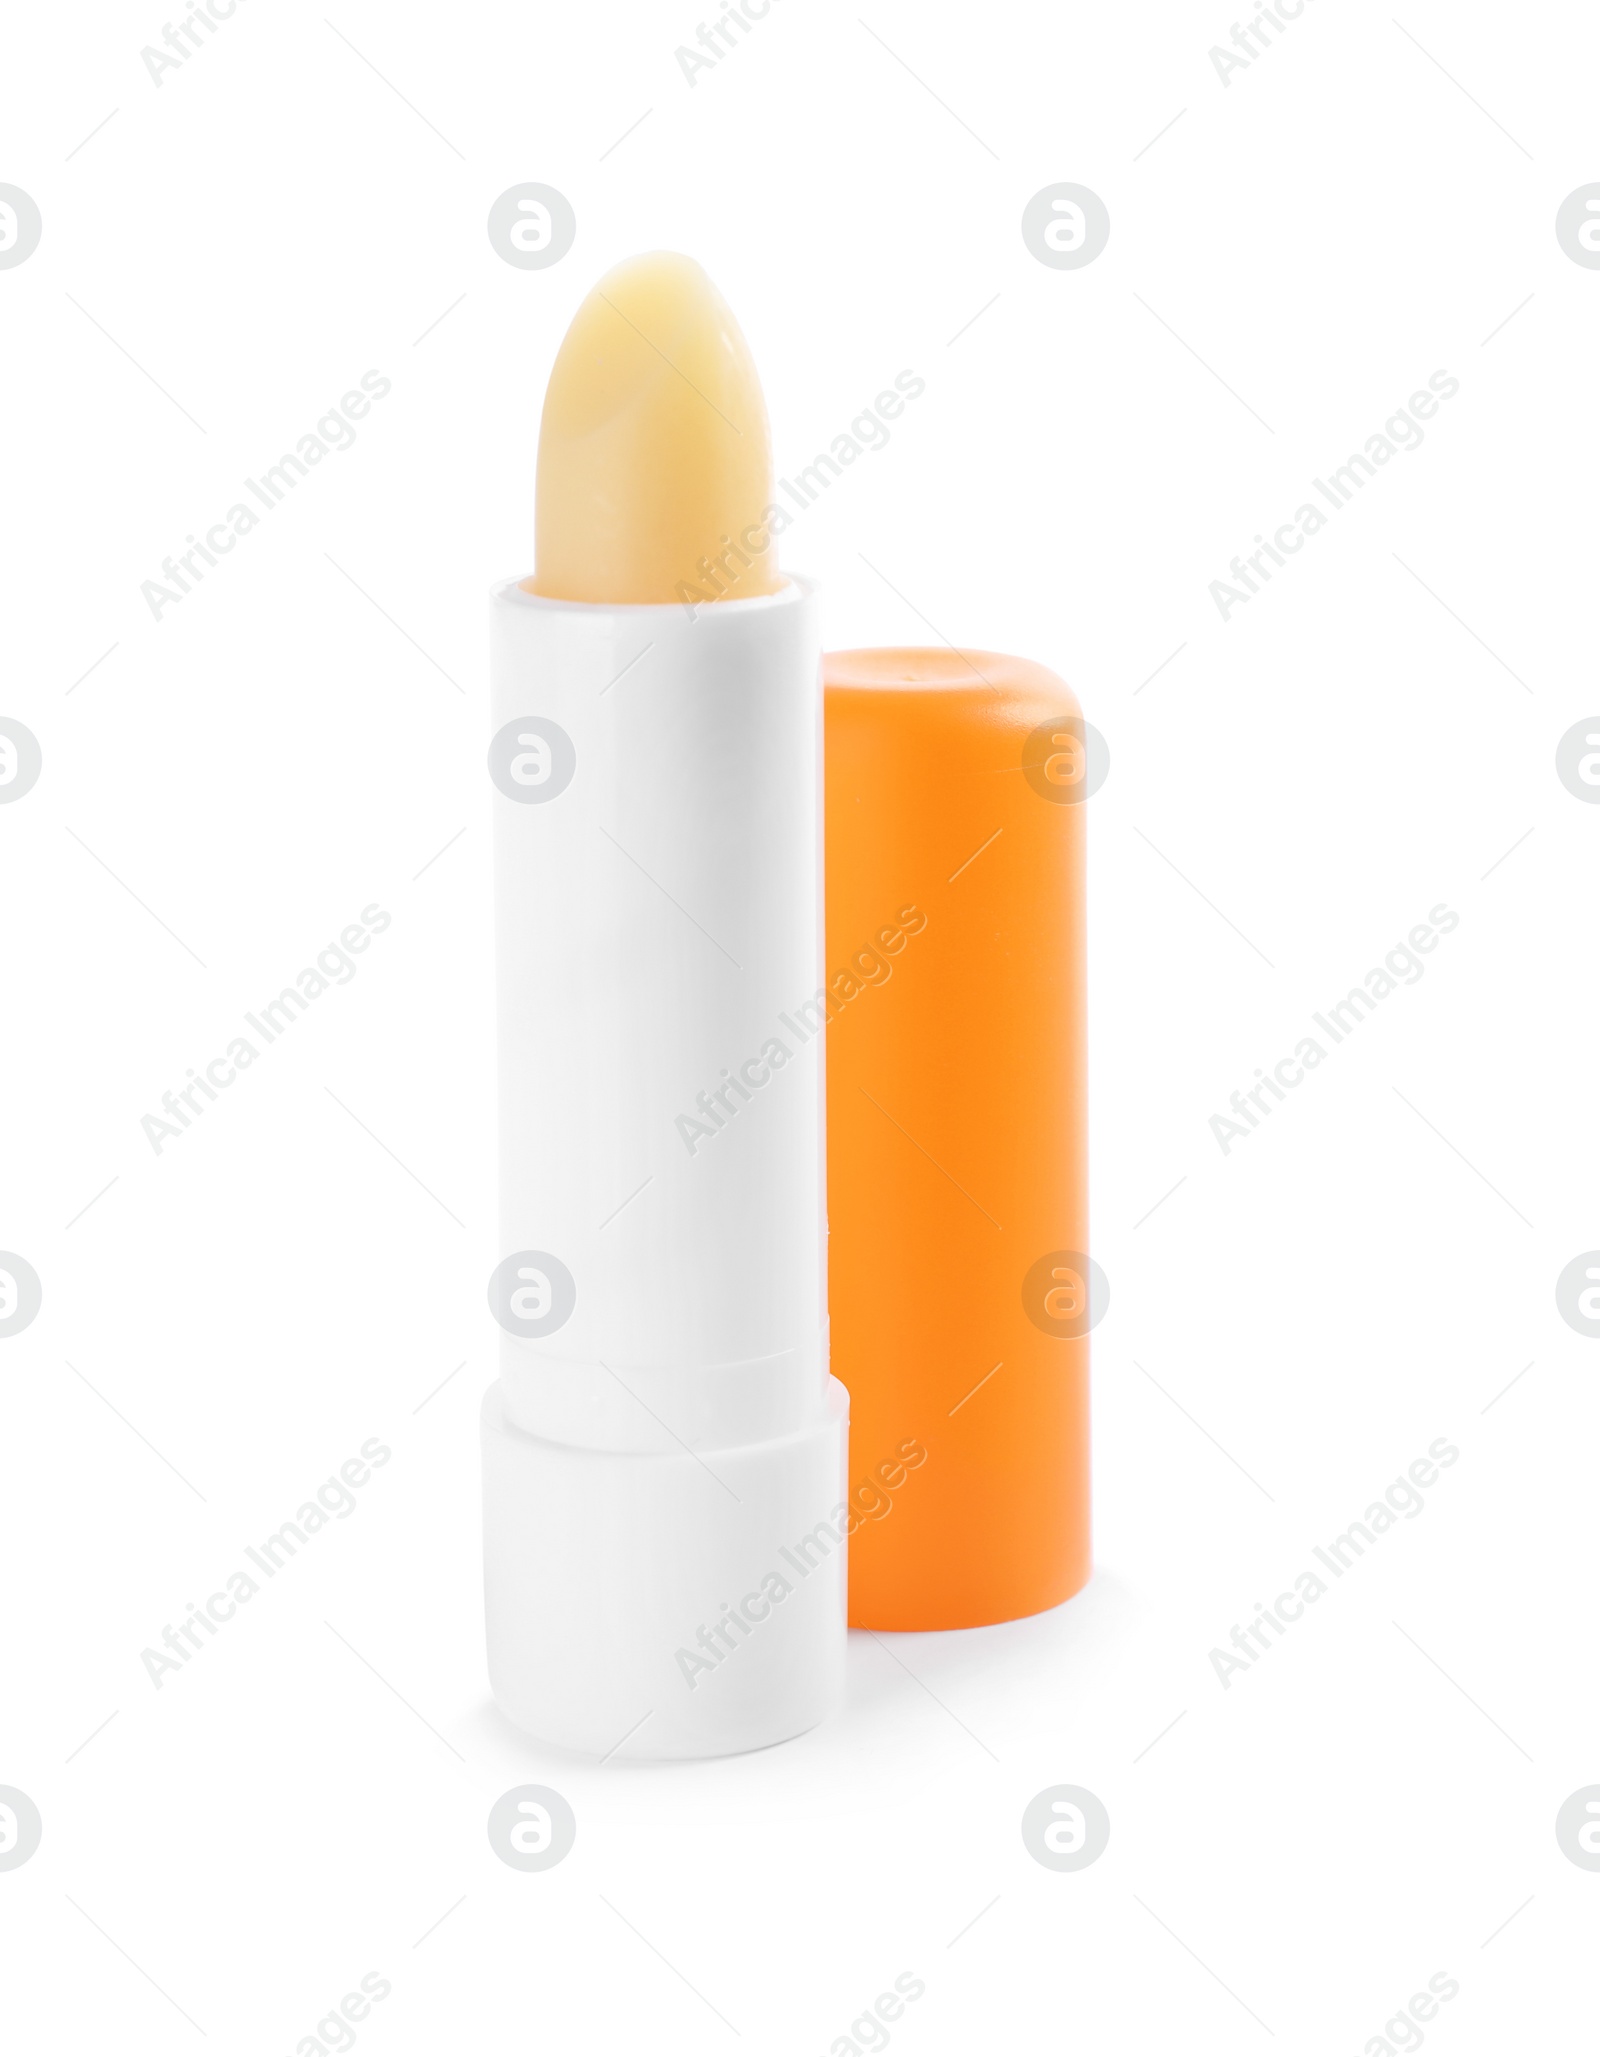 Photo of Sun protection lip balm isolated on white